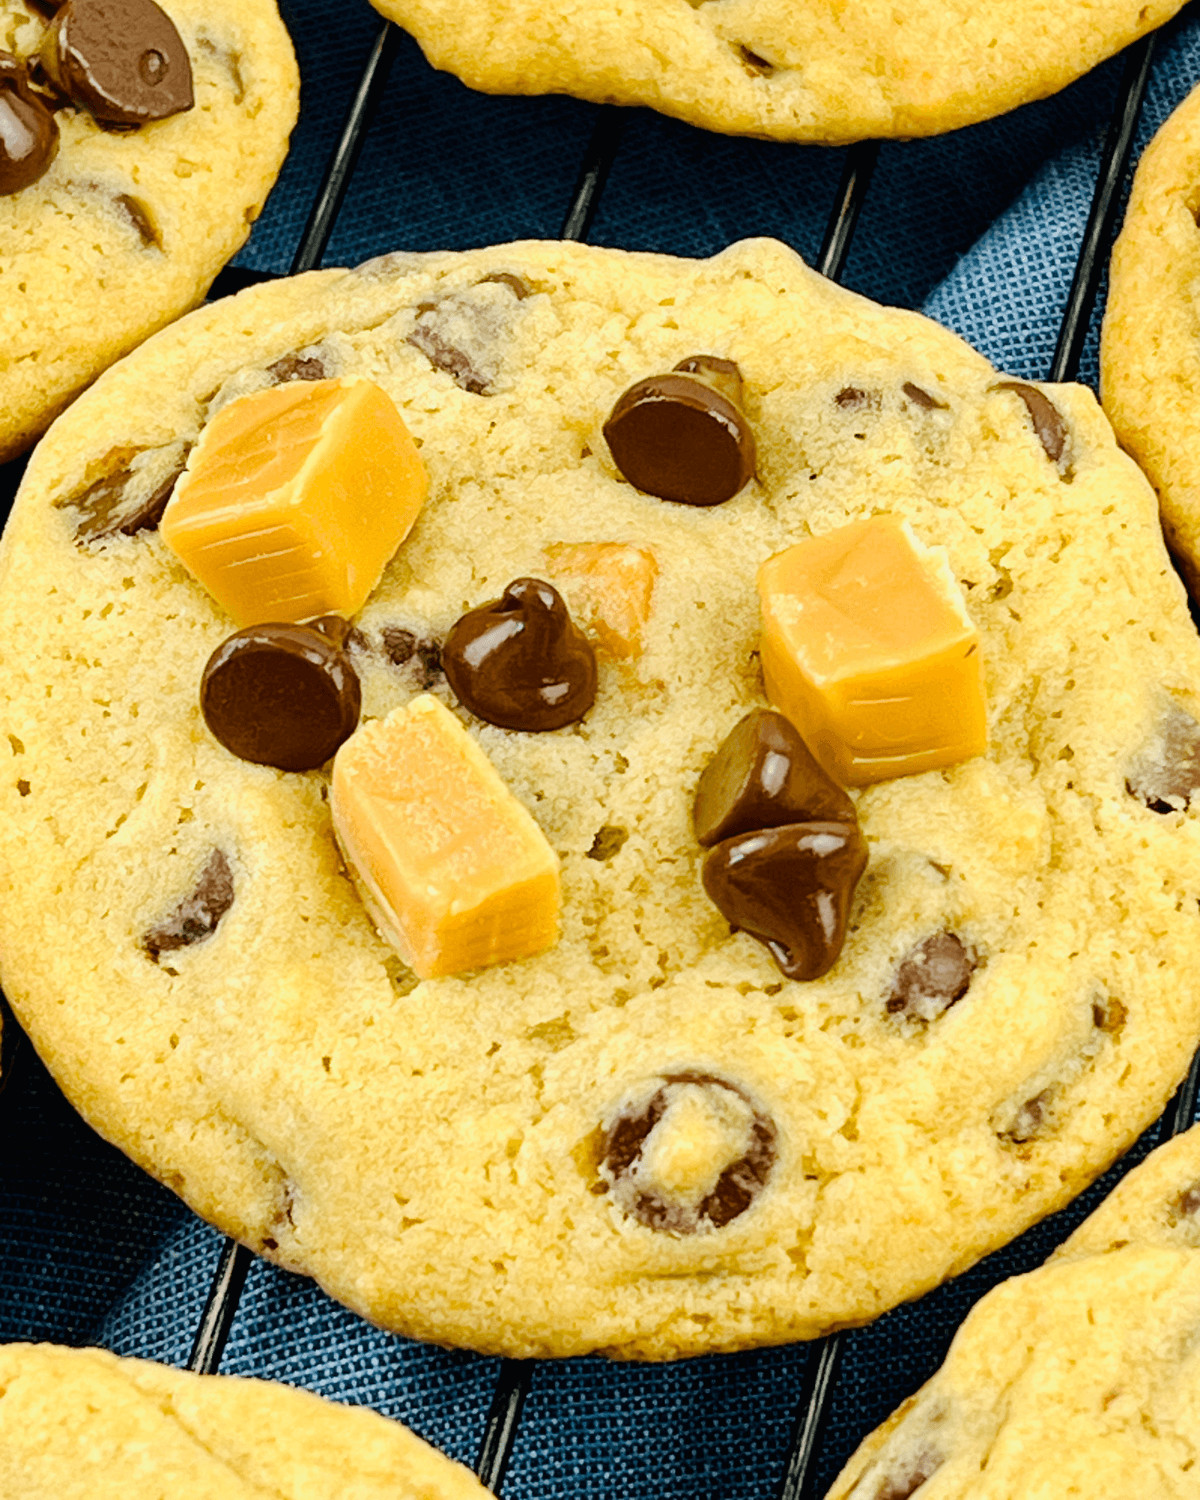 Caramel Chocolate Chip Cookies in close up.